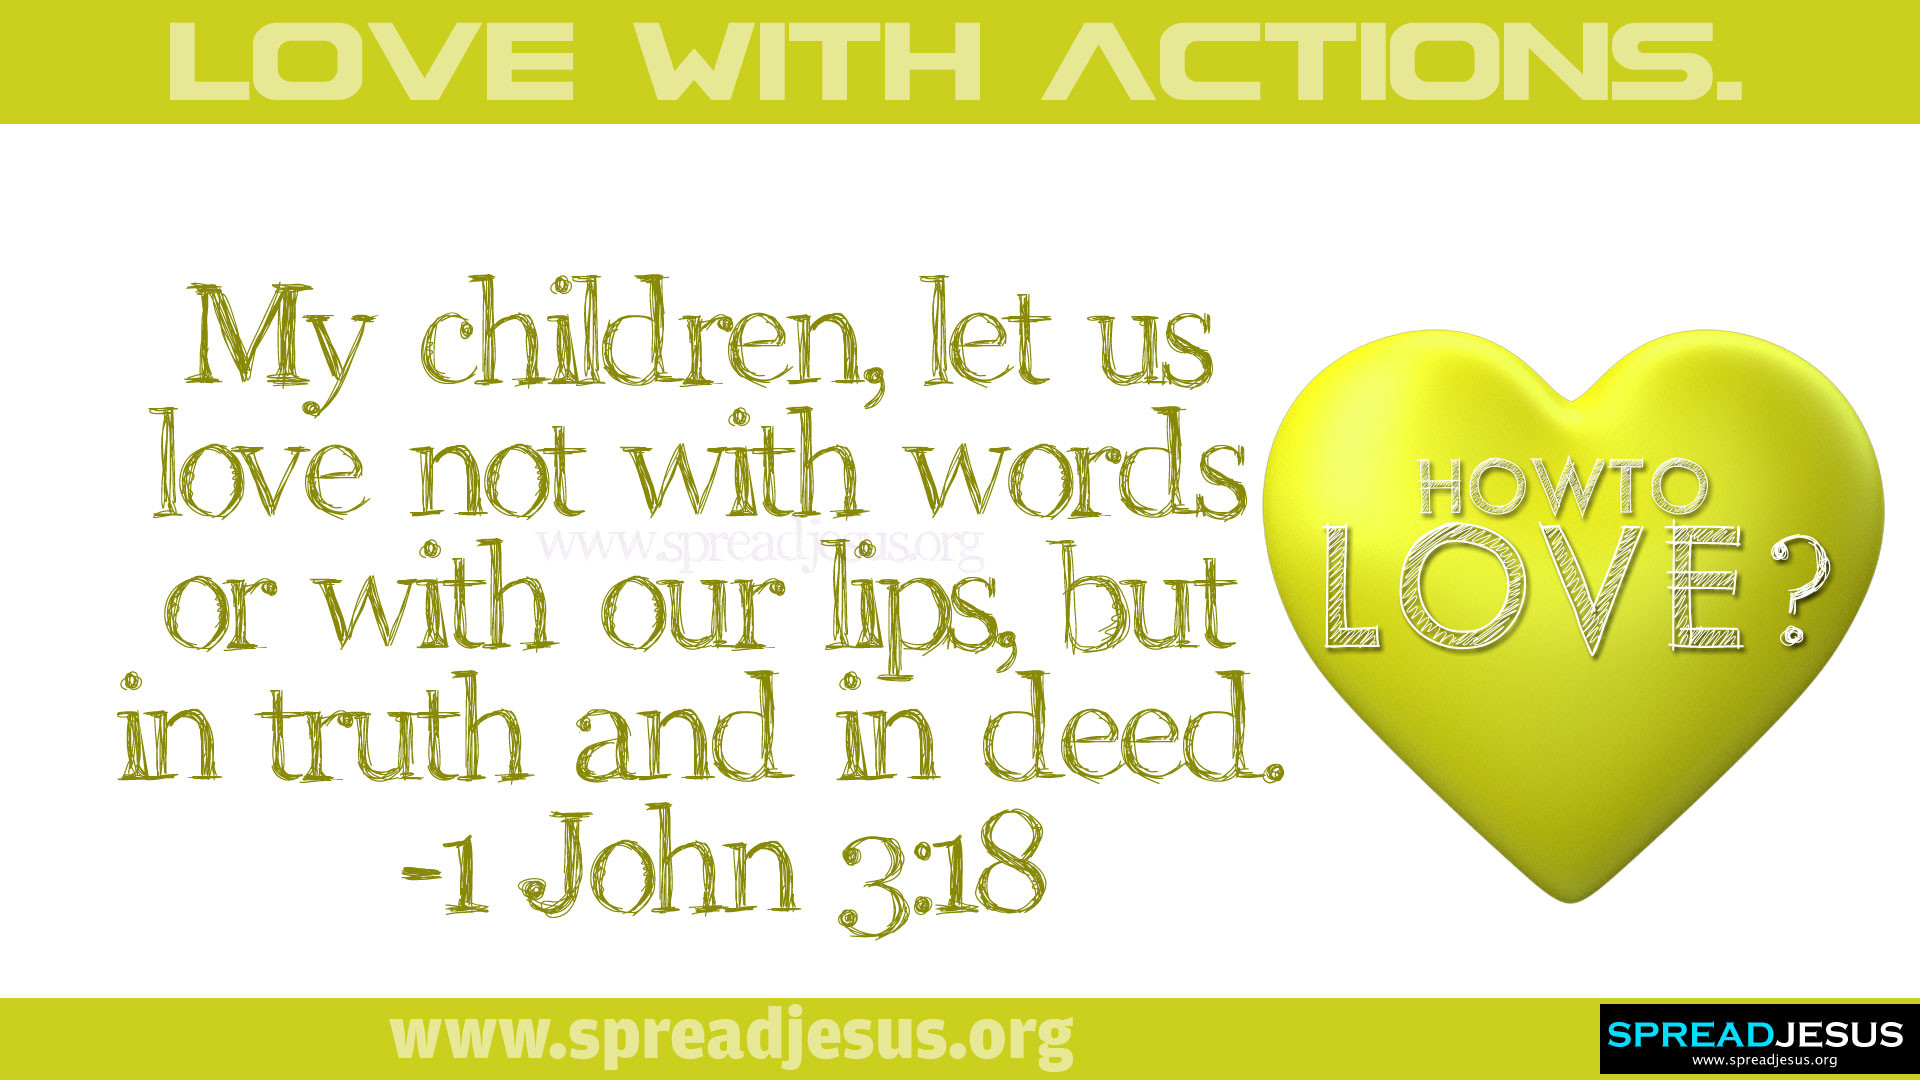 How To Lovelove With Actions - Bible Love Words - HD Wallpaper 